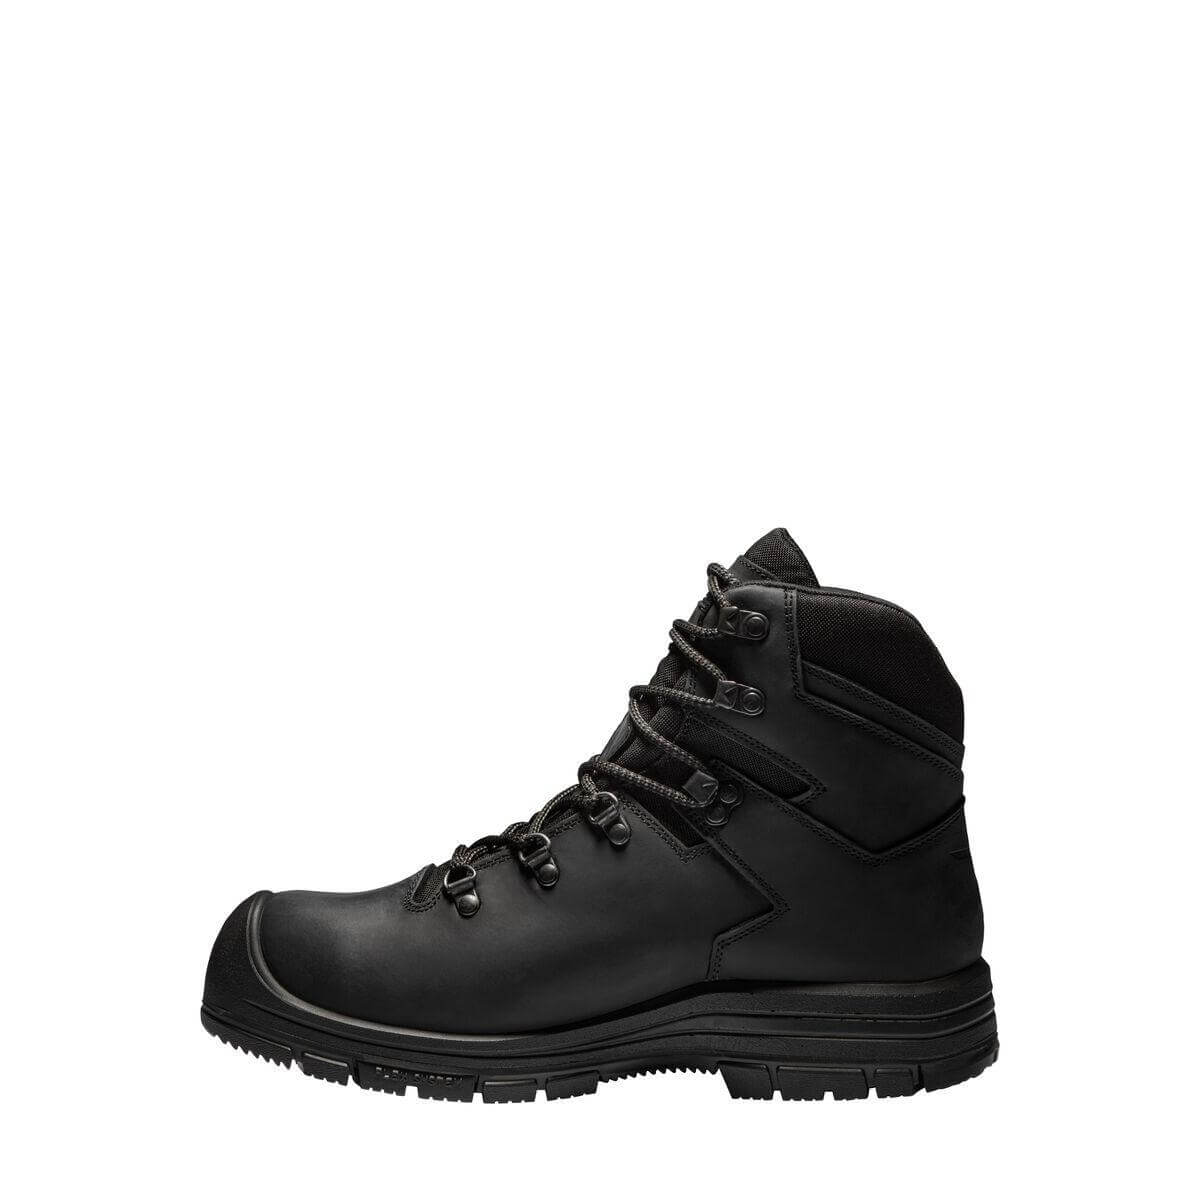 Solid Gear by Snickers 75002 Bravo GTX Gore Tex Wide Fit Waterproof Composite Toe S3 Safety Boots Black 02 #colour_black